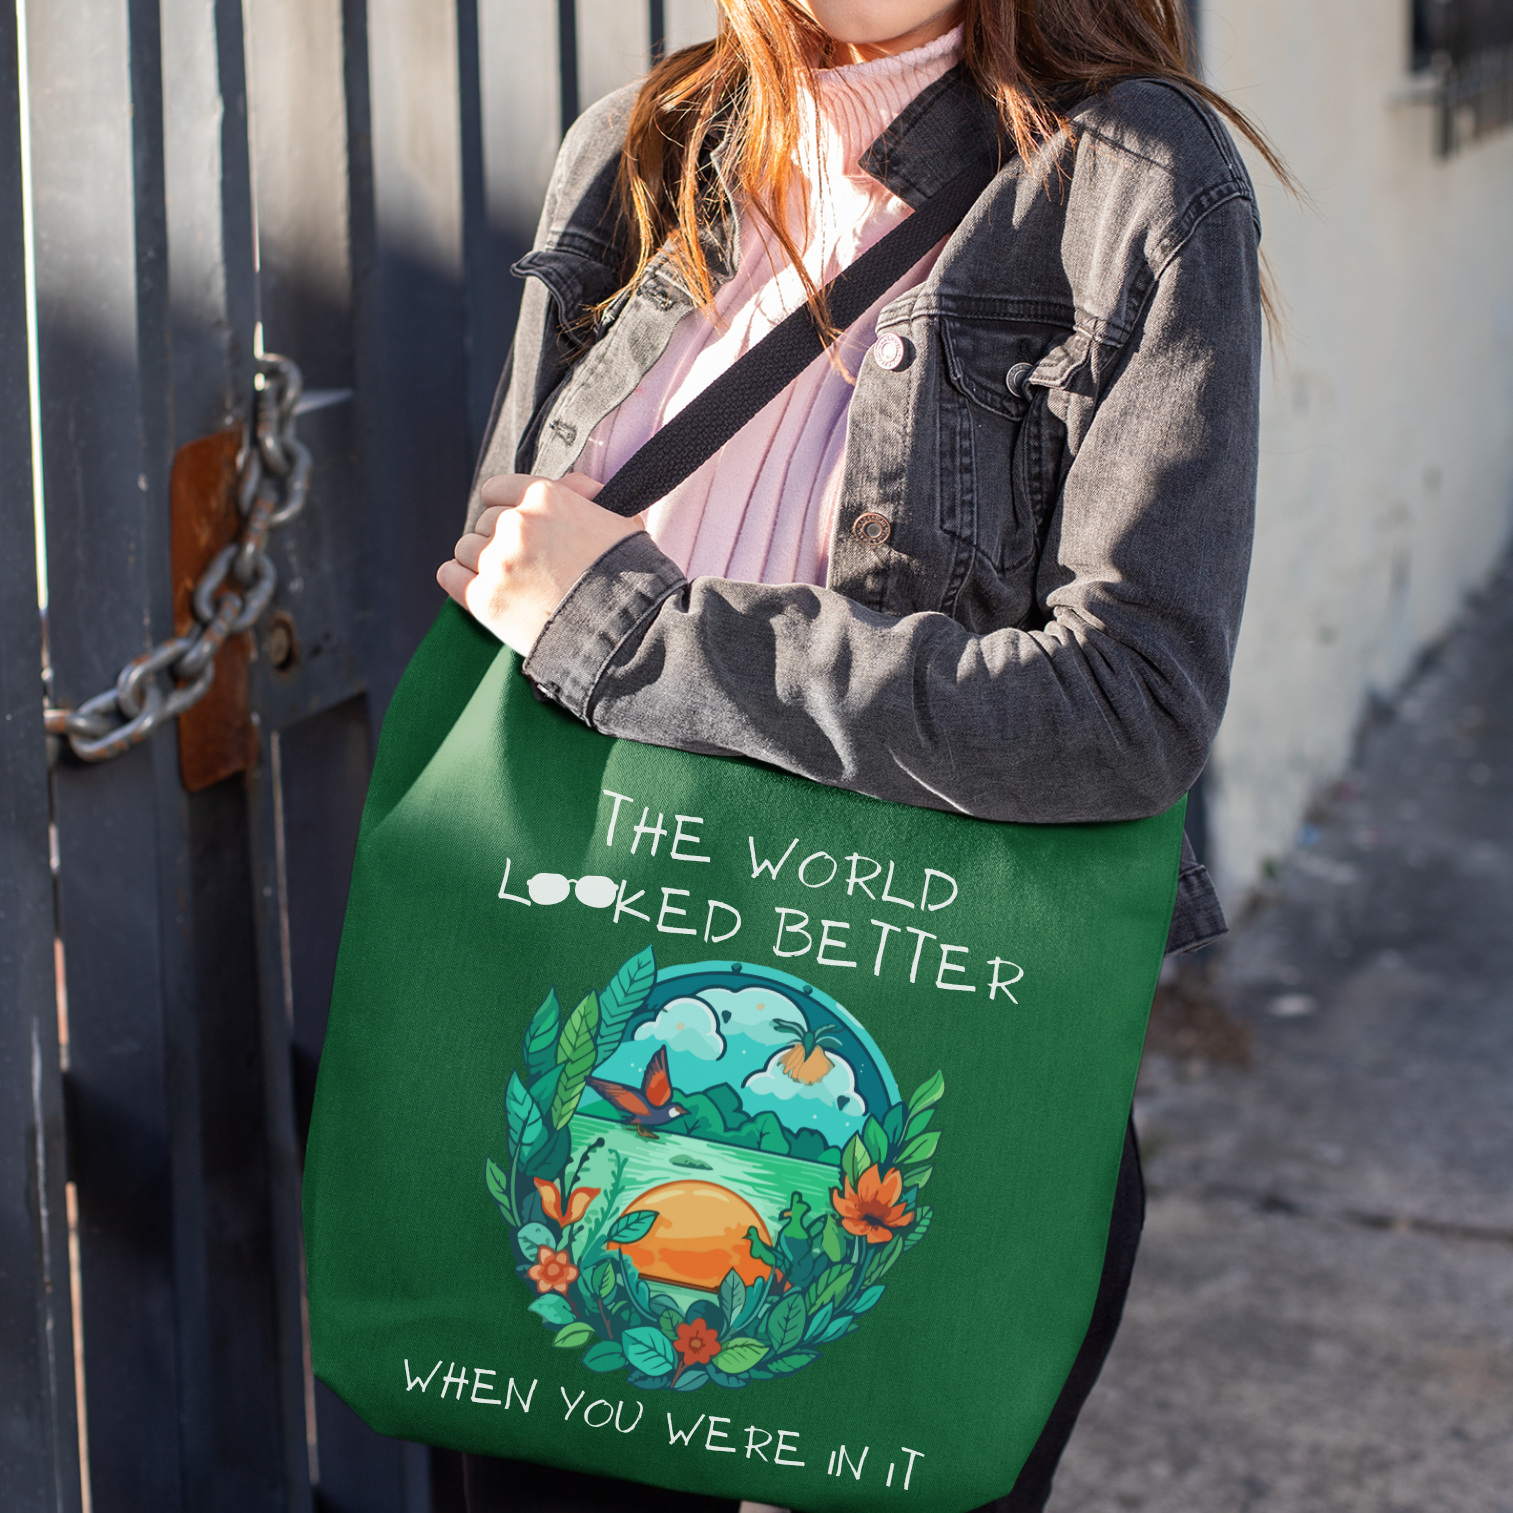 Green Grief Tote Bag with a nature graphic in blues and greens, and the message "The world looked better when you were in it."